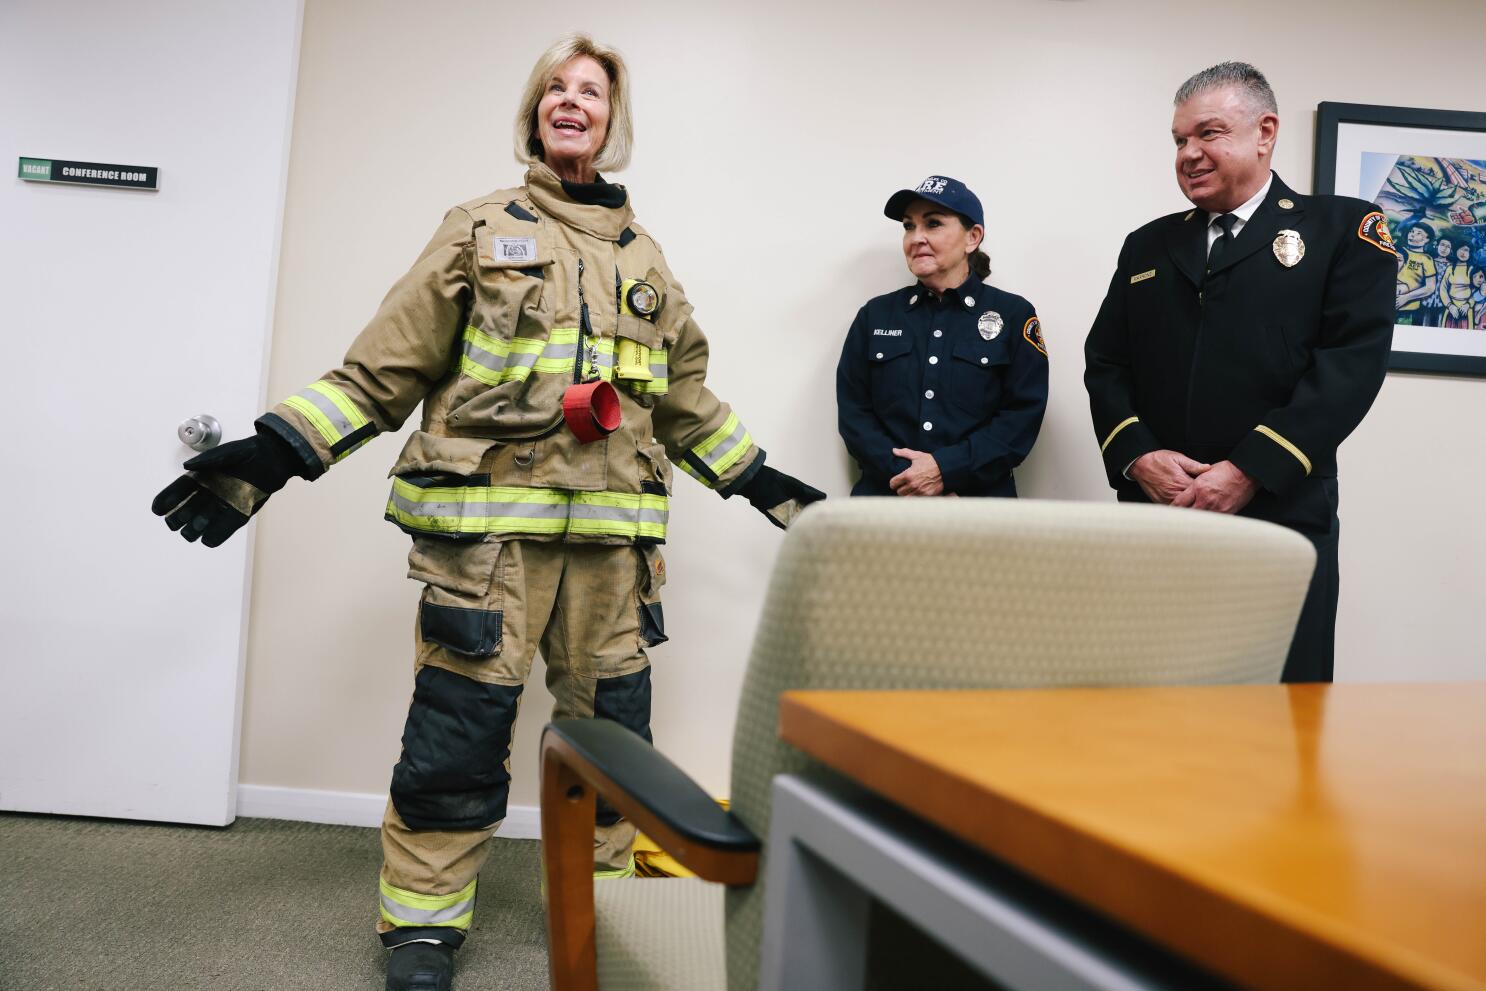 Ill-fitting gear endangers female firefighters, supervisors say